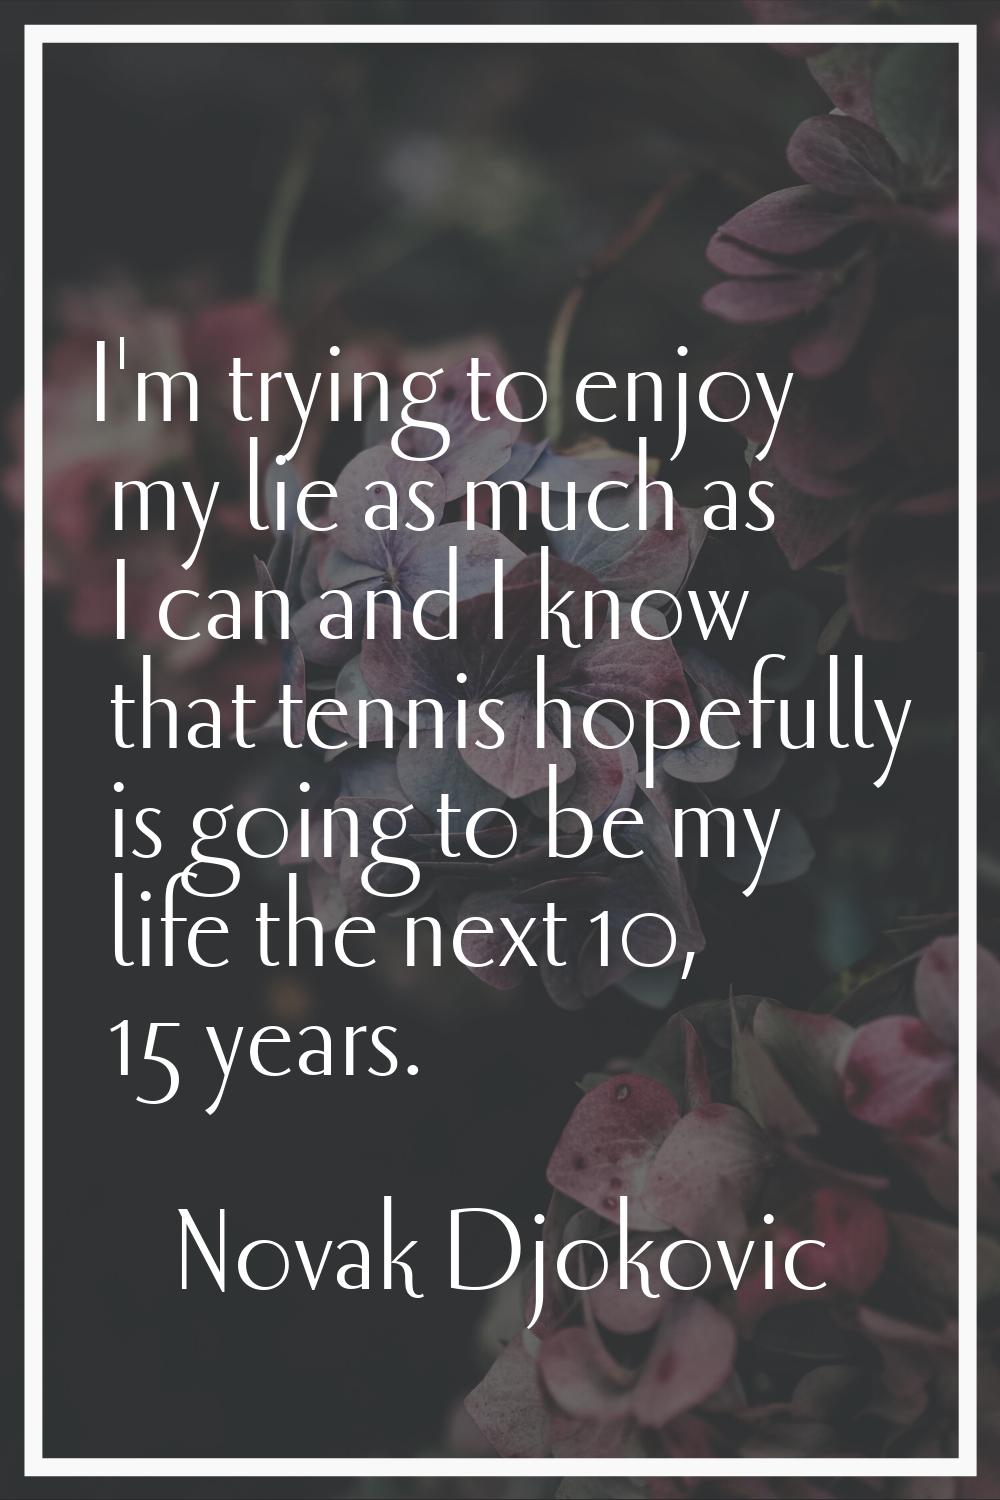 I'm trying to enjoy my lie as much as I can and I know that tennis hopefully is going to be my life